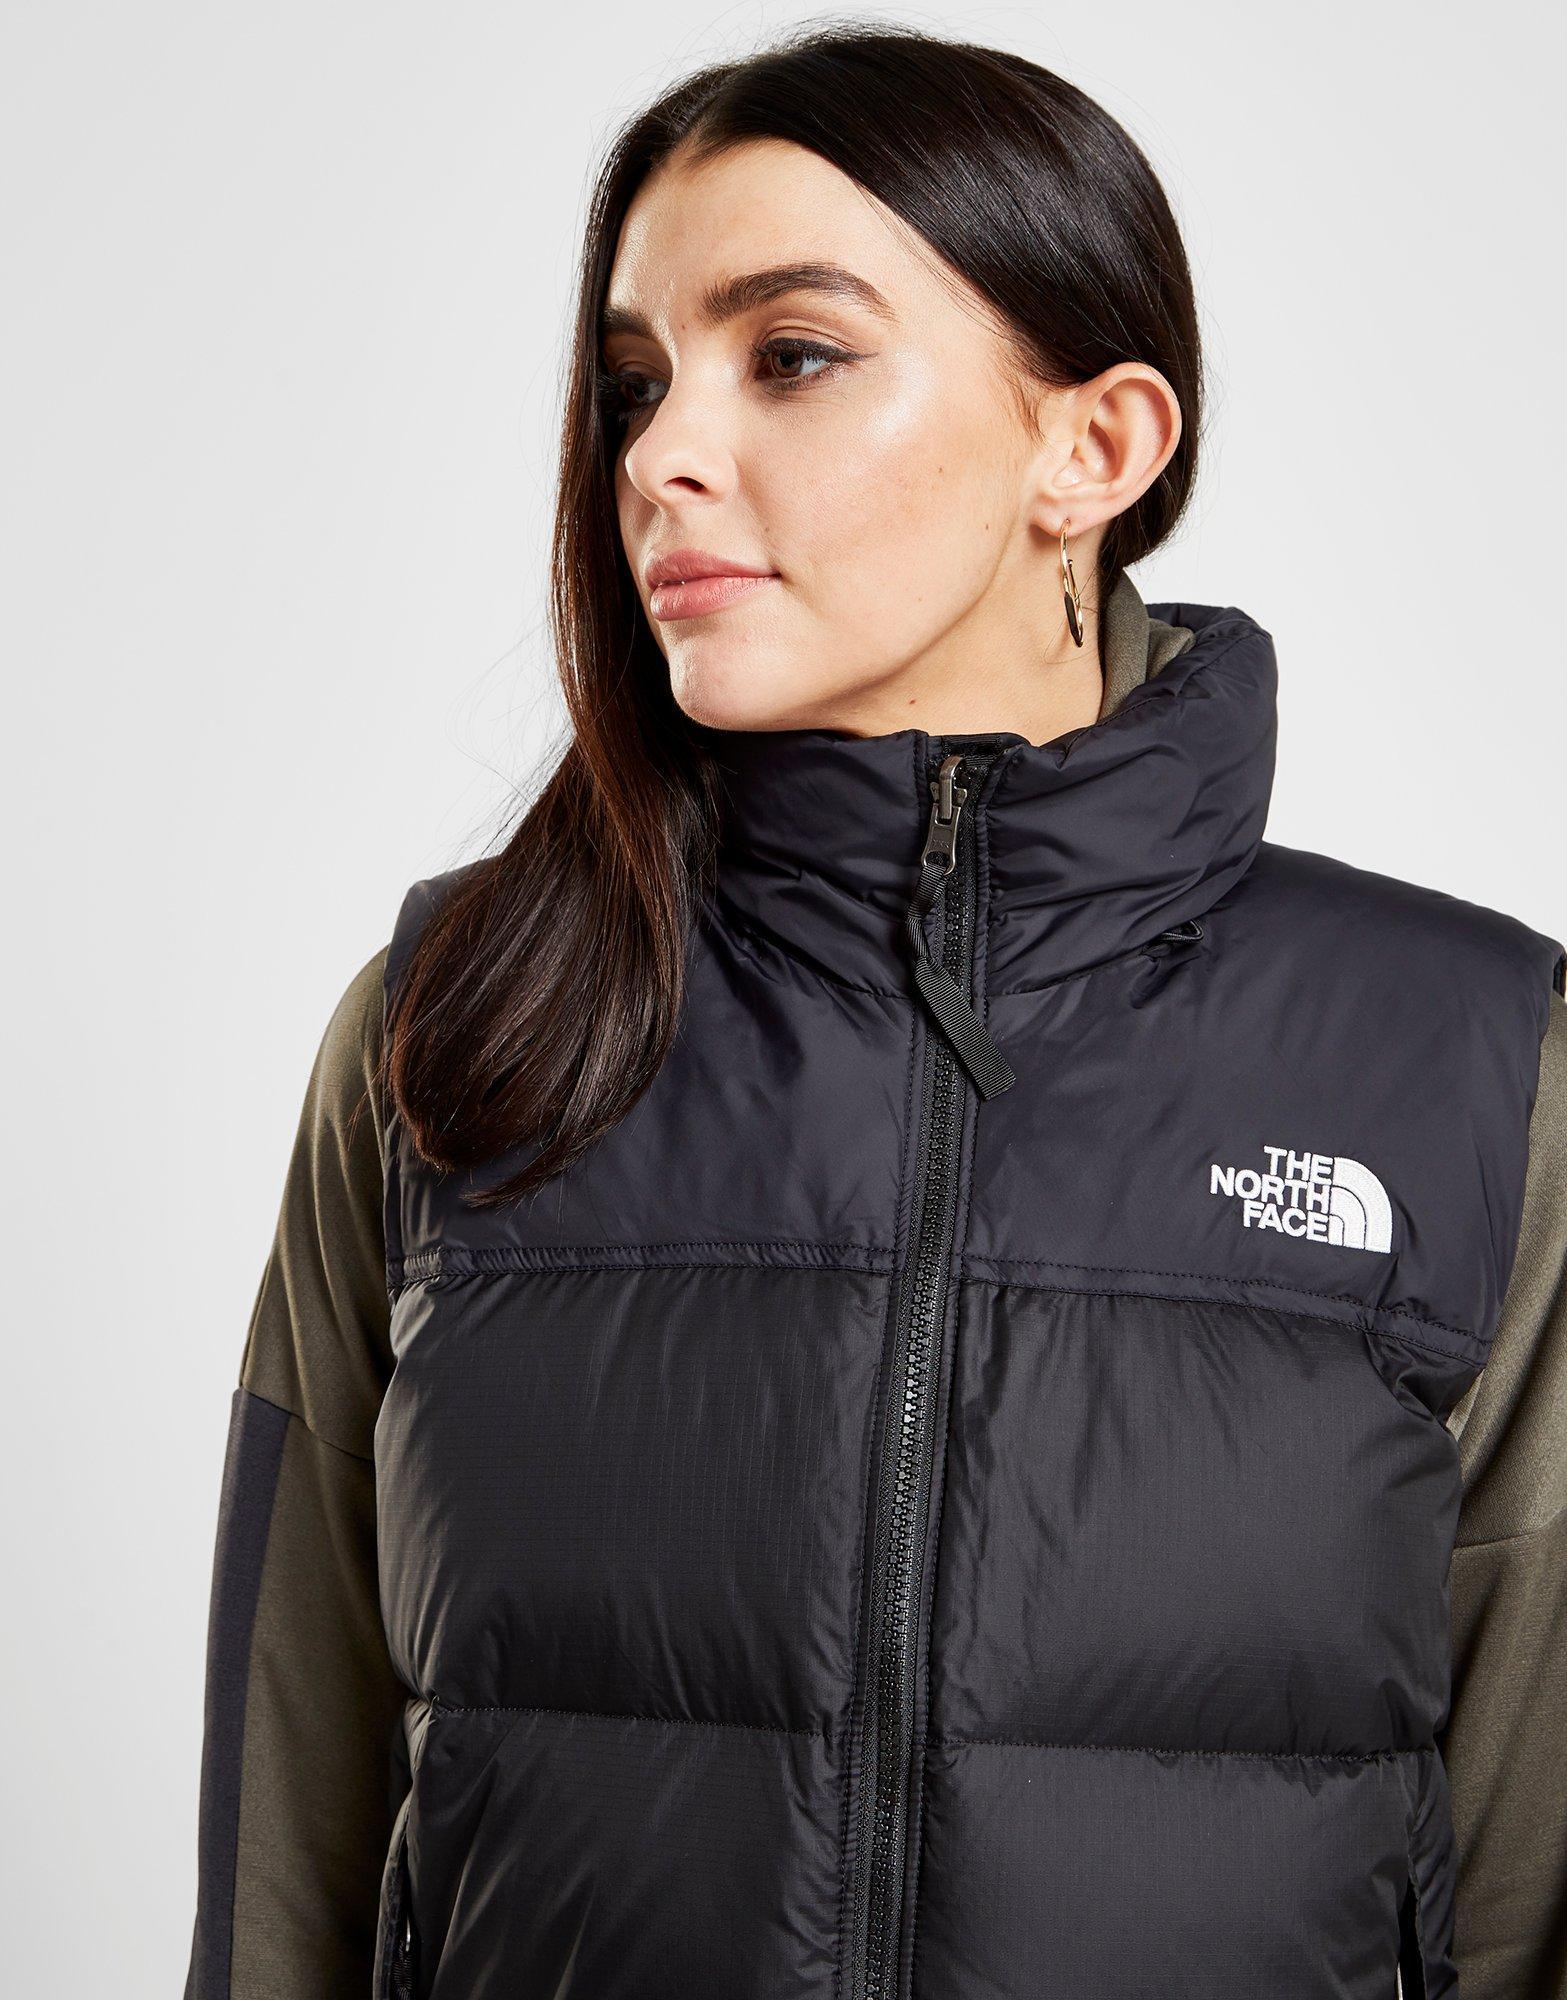 north face bottoms jd